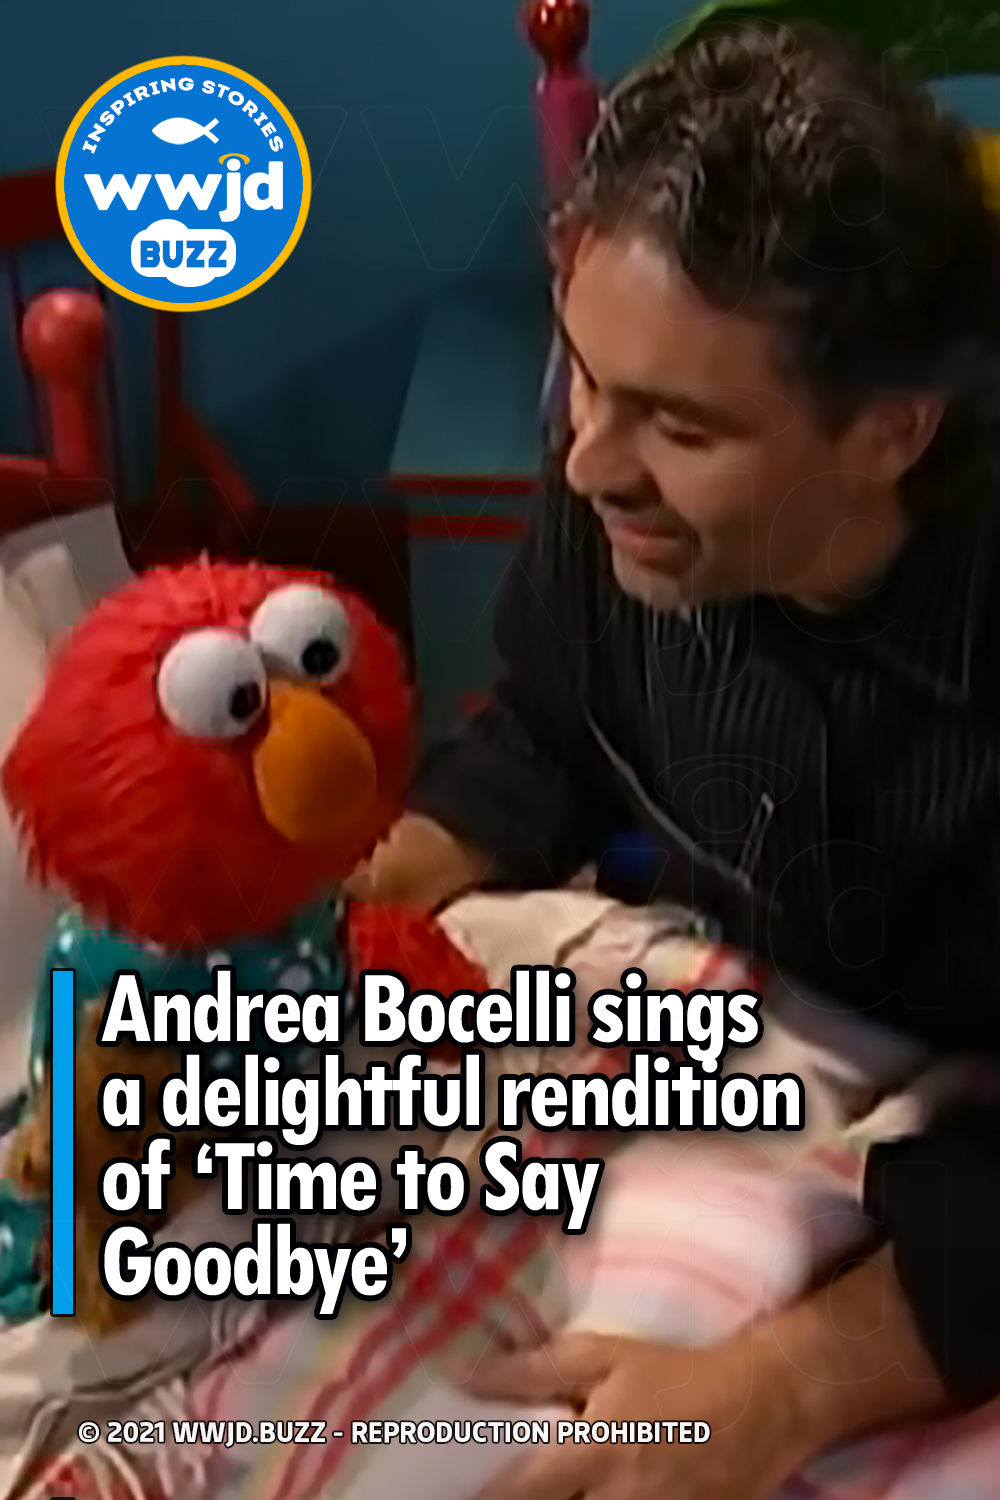 Andrea Bocelli sings a delightful rendition of ‘Time to Say Goodbye’